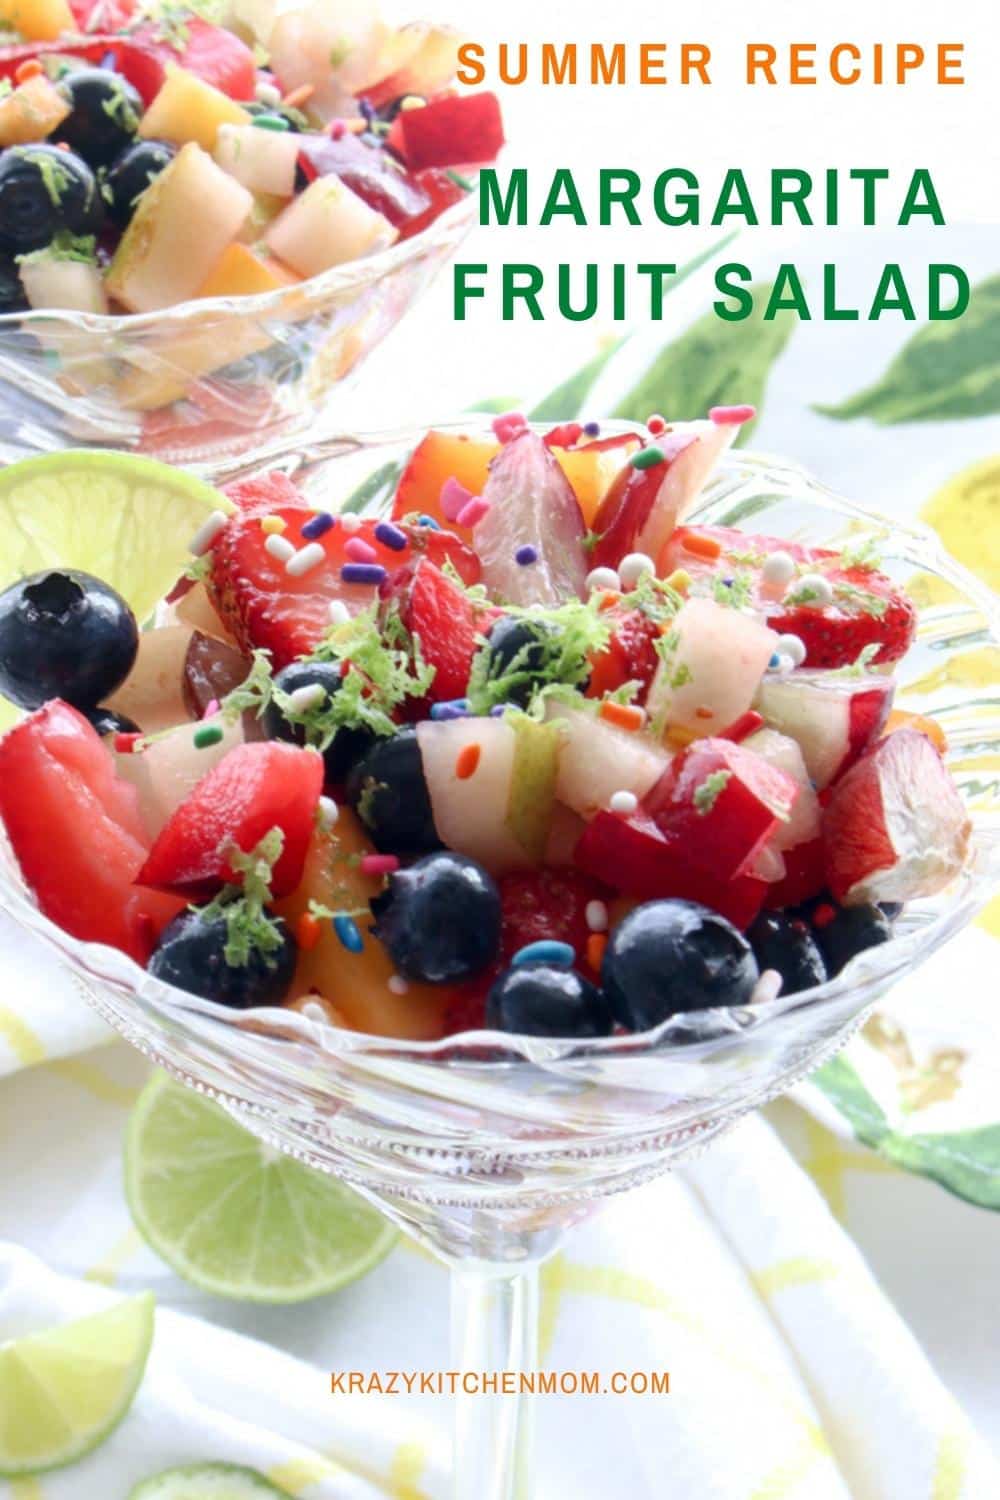 Impress your guests with this elevated adult fruit salad loaded with seasonal fresh fruit and tossed in a light tequila-based dressing. via @krazykitchenmom